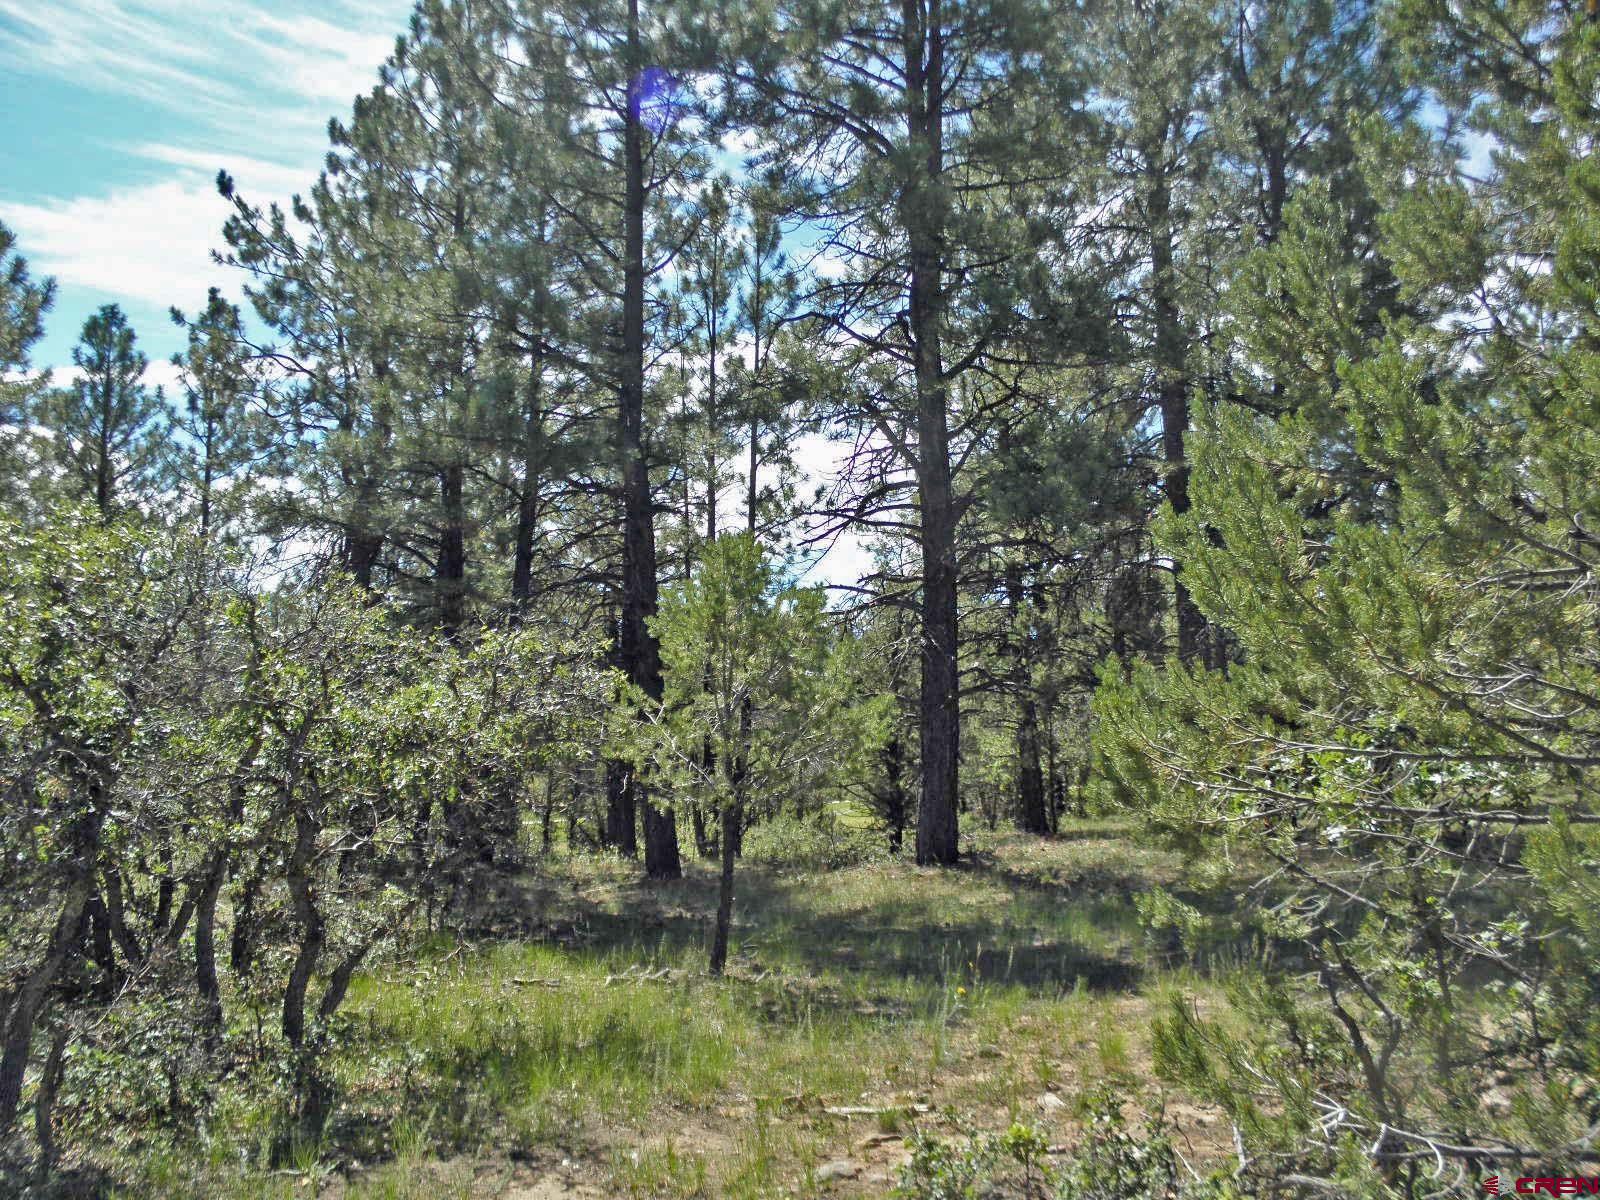 Great fairly level lot with Large Mature Ponderosa Pines, with nice views of Sneffels from a 2nd story house, from the back of the lot you can see the 16th fairway, the 16th tee box, the lake and the Cimarron Mts.  Just a short walk to the club house, driving range and mail boxes.  Quick and easy access to Montrose, the Great Montrose Airport with direct flights to several getaway cities.  Less than half hour to Switzerland of America, Ouray Colorado, with the famous hot springs pool and the starting point for several hiking trails and jeep roads.  Lets not leave out less than 45 minuets from Telluride for world class skiing, festivals. Make sure this lot is on your to see list.